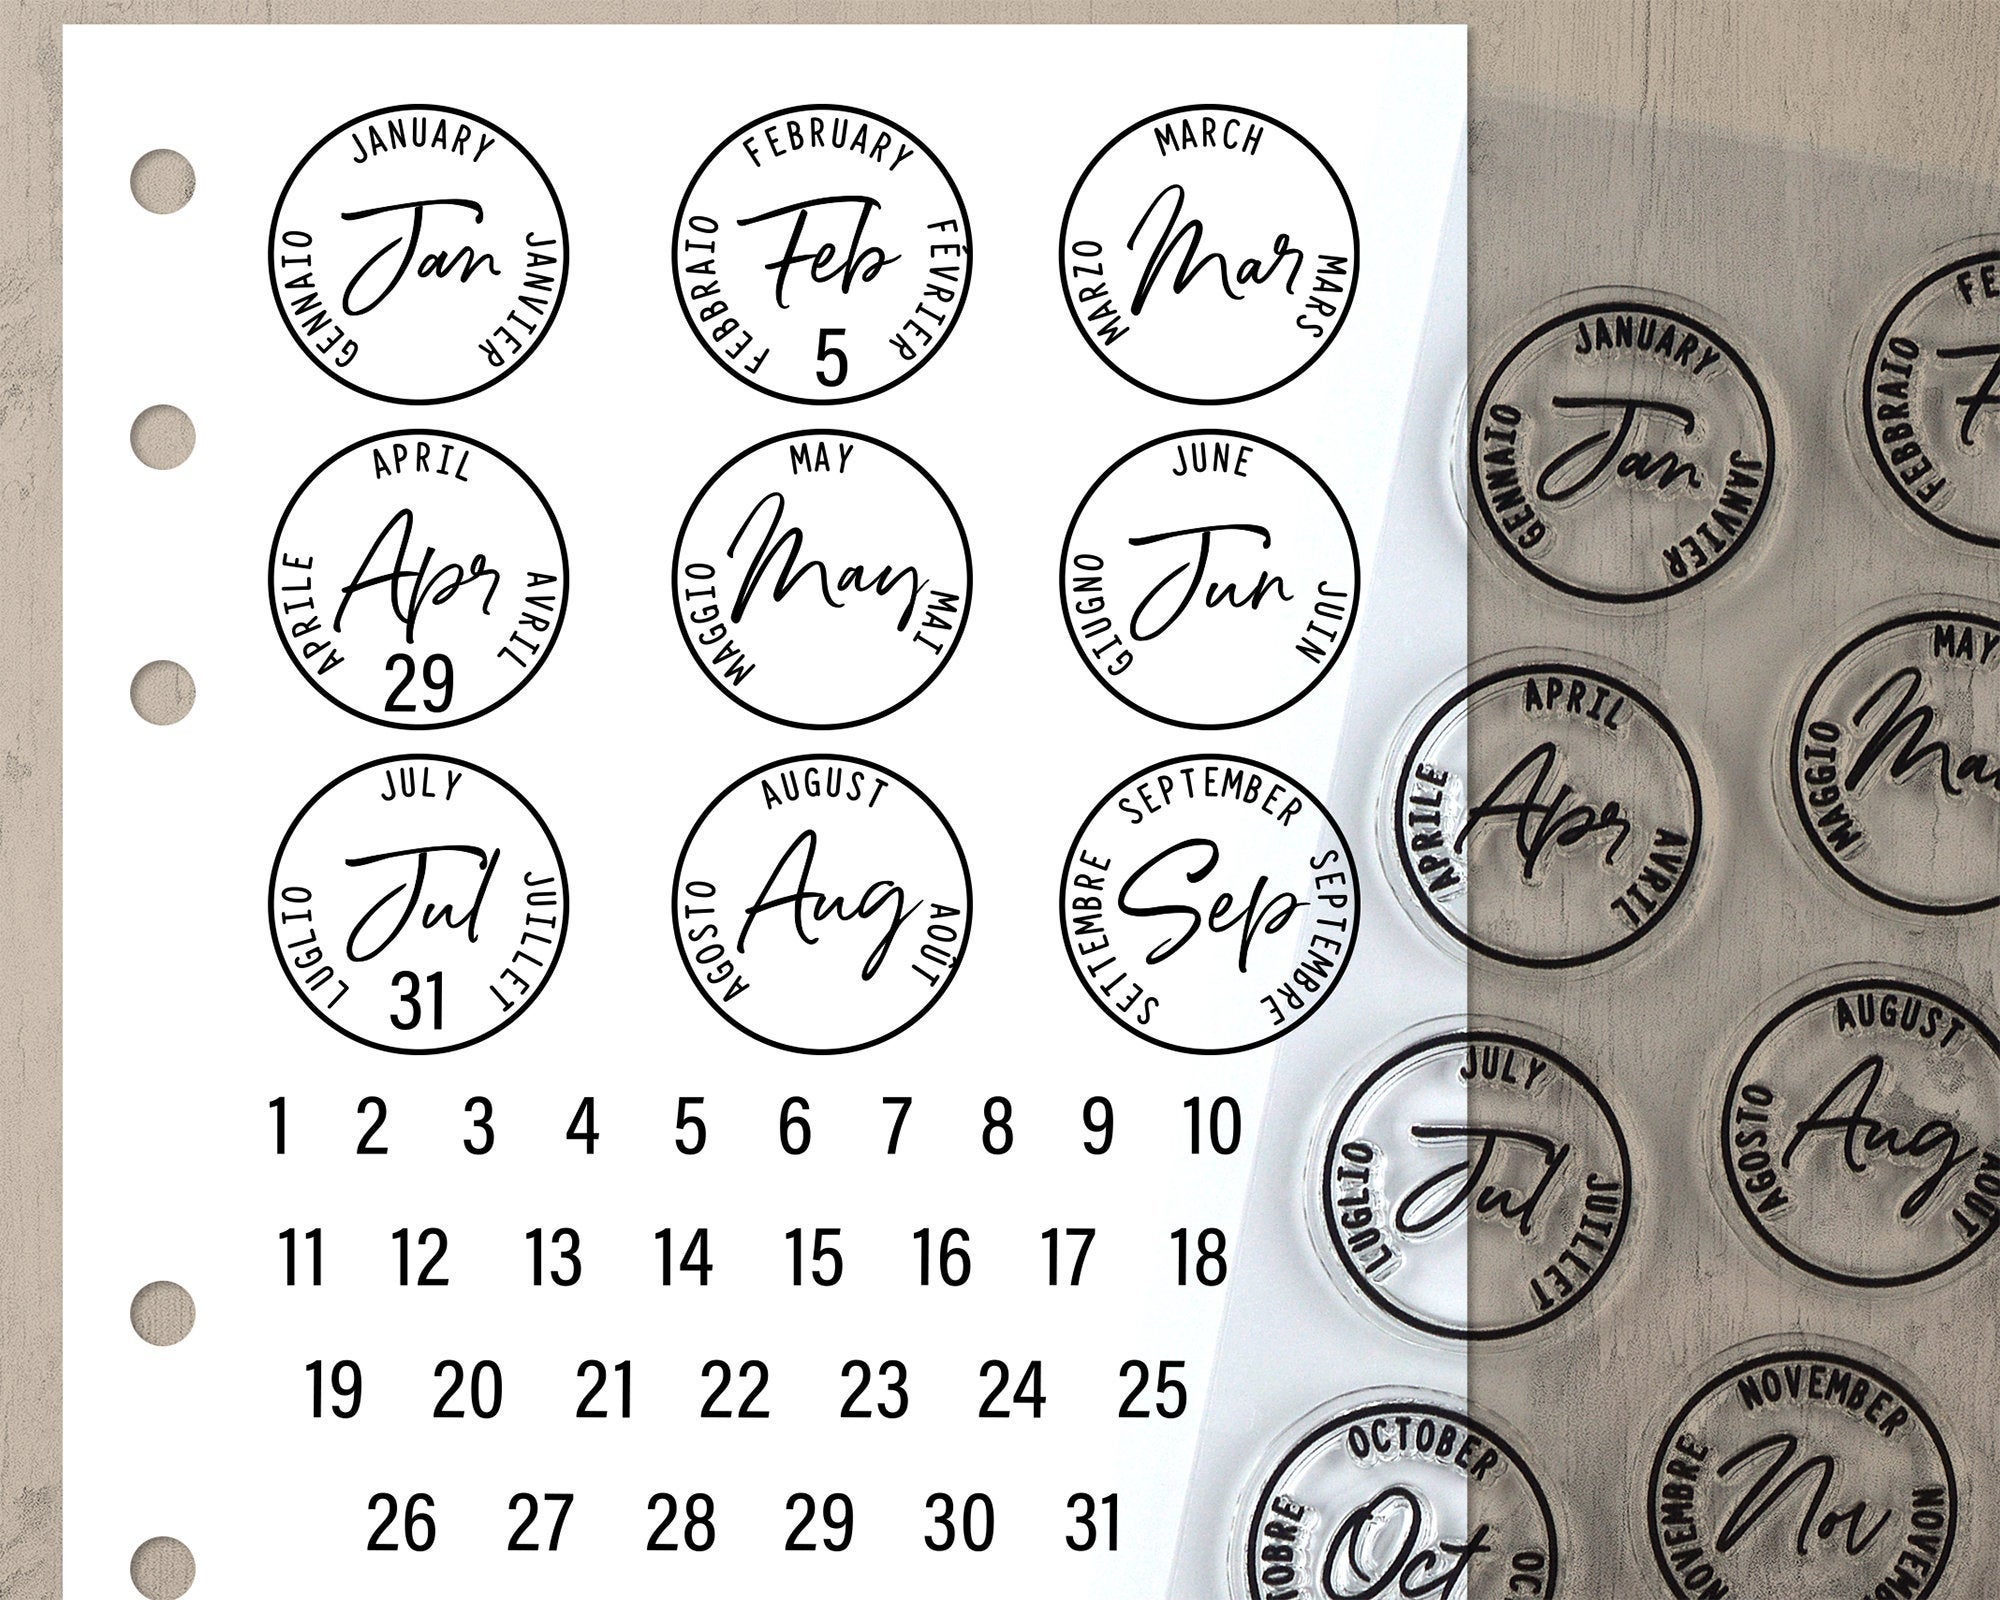 Date Stamps & Number Stamps